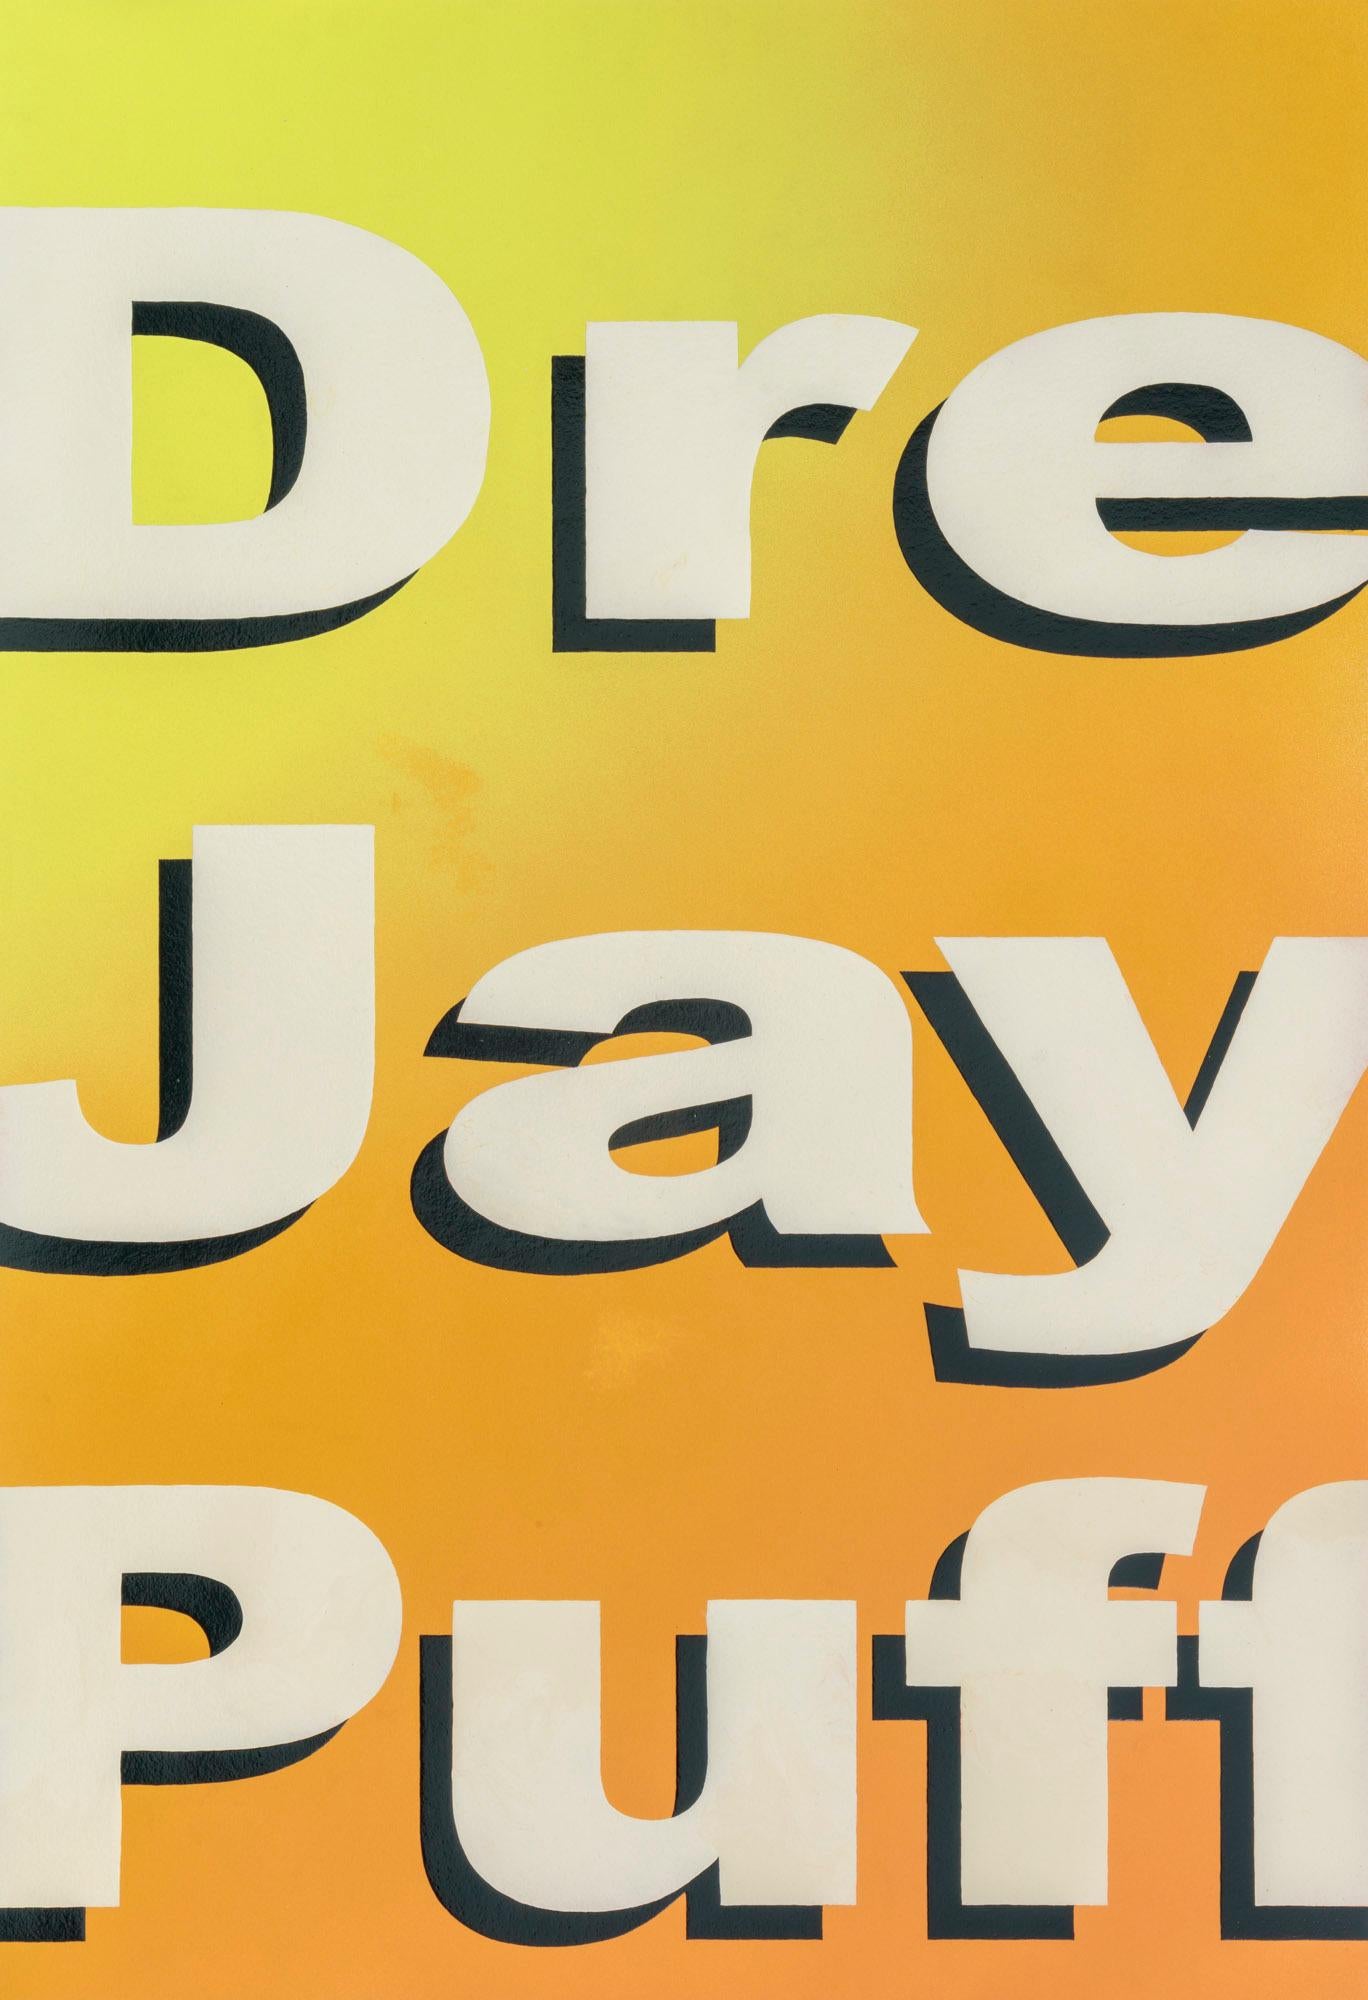 Untitled (Dre Jay Puff), 2018 is a unique contemporary textual painting on paper. The artist first creates a unique background atmosphere with matte spray paint and then meticulously hand-paints text in his material of choice, nail enamel.

Artwork